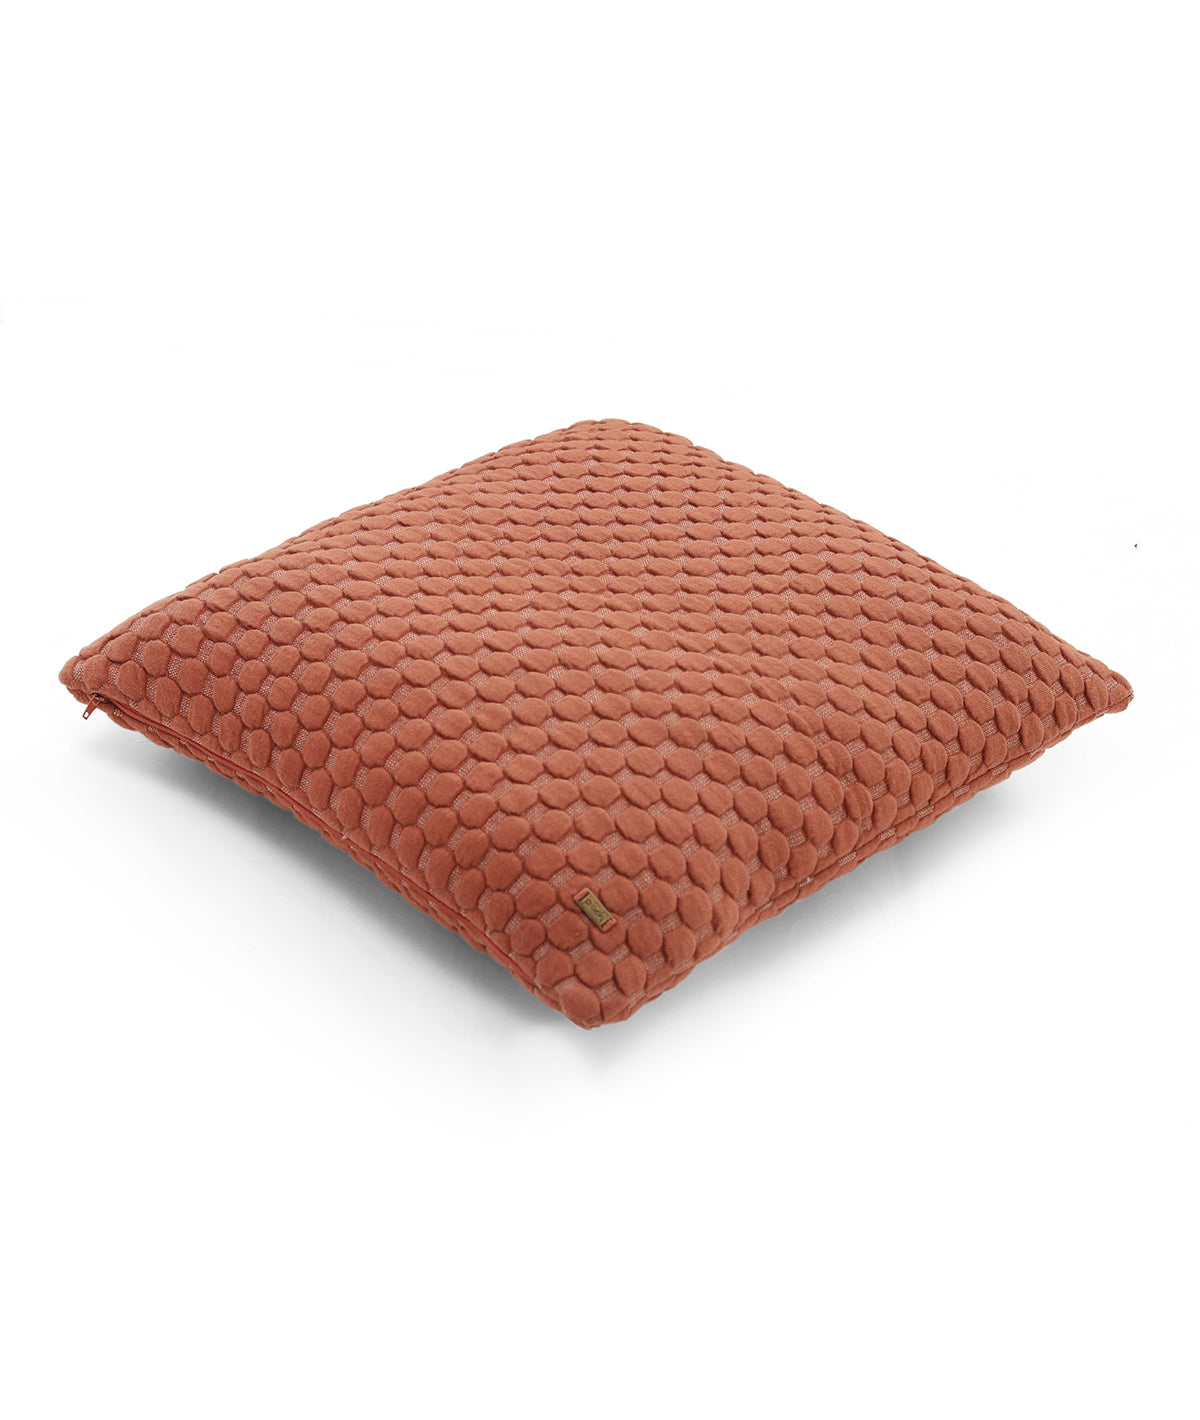 Bubbles Rust & Natural Quilted Cotton Knitted Decorative 18 X 18 Inches Cushion Cover